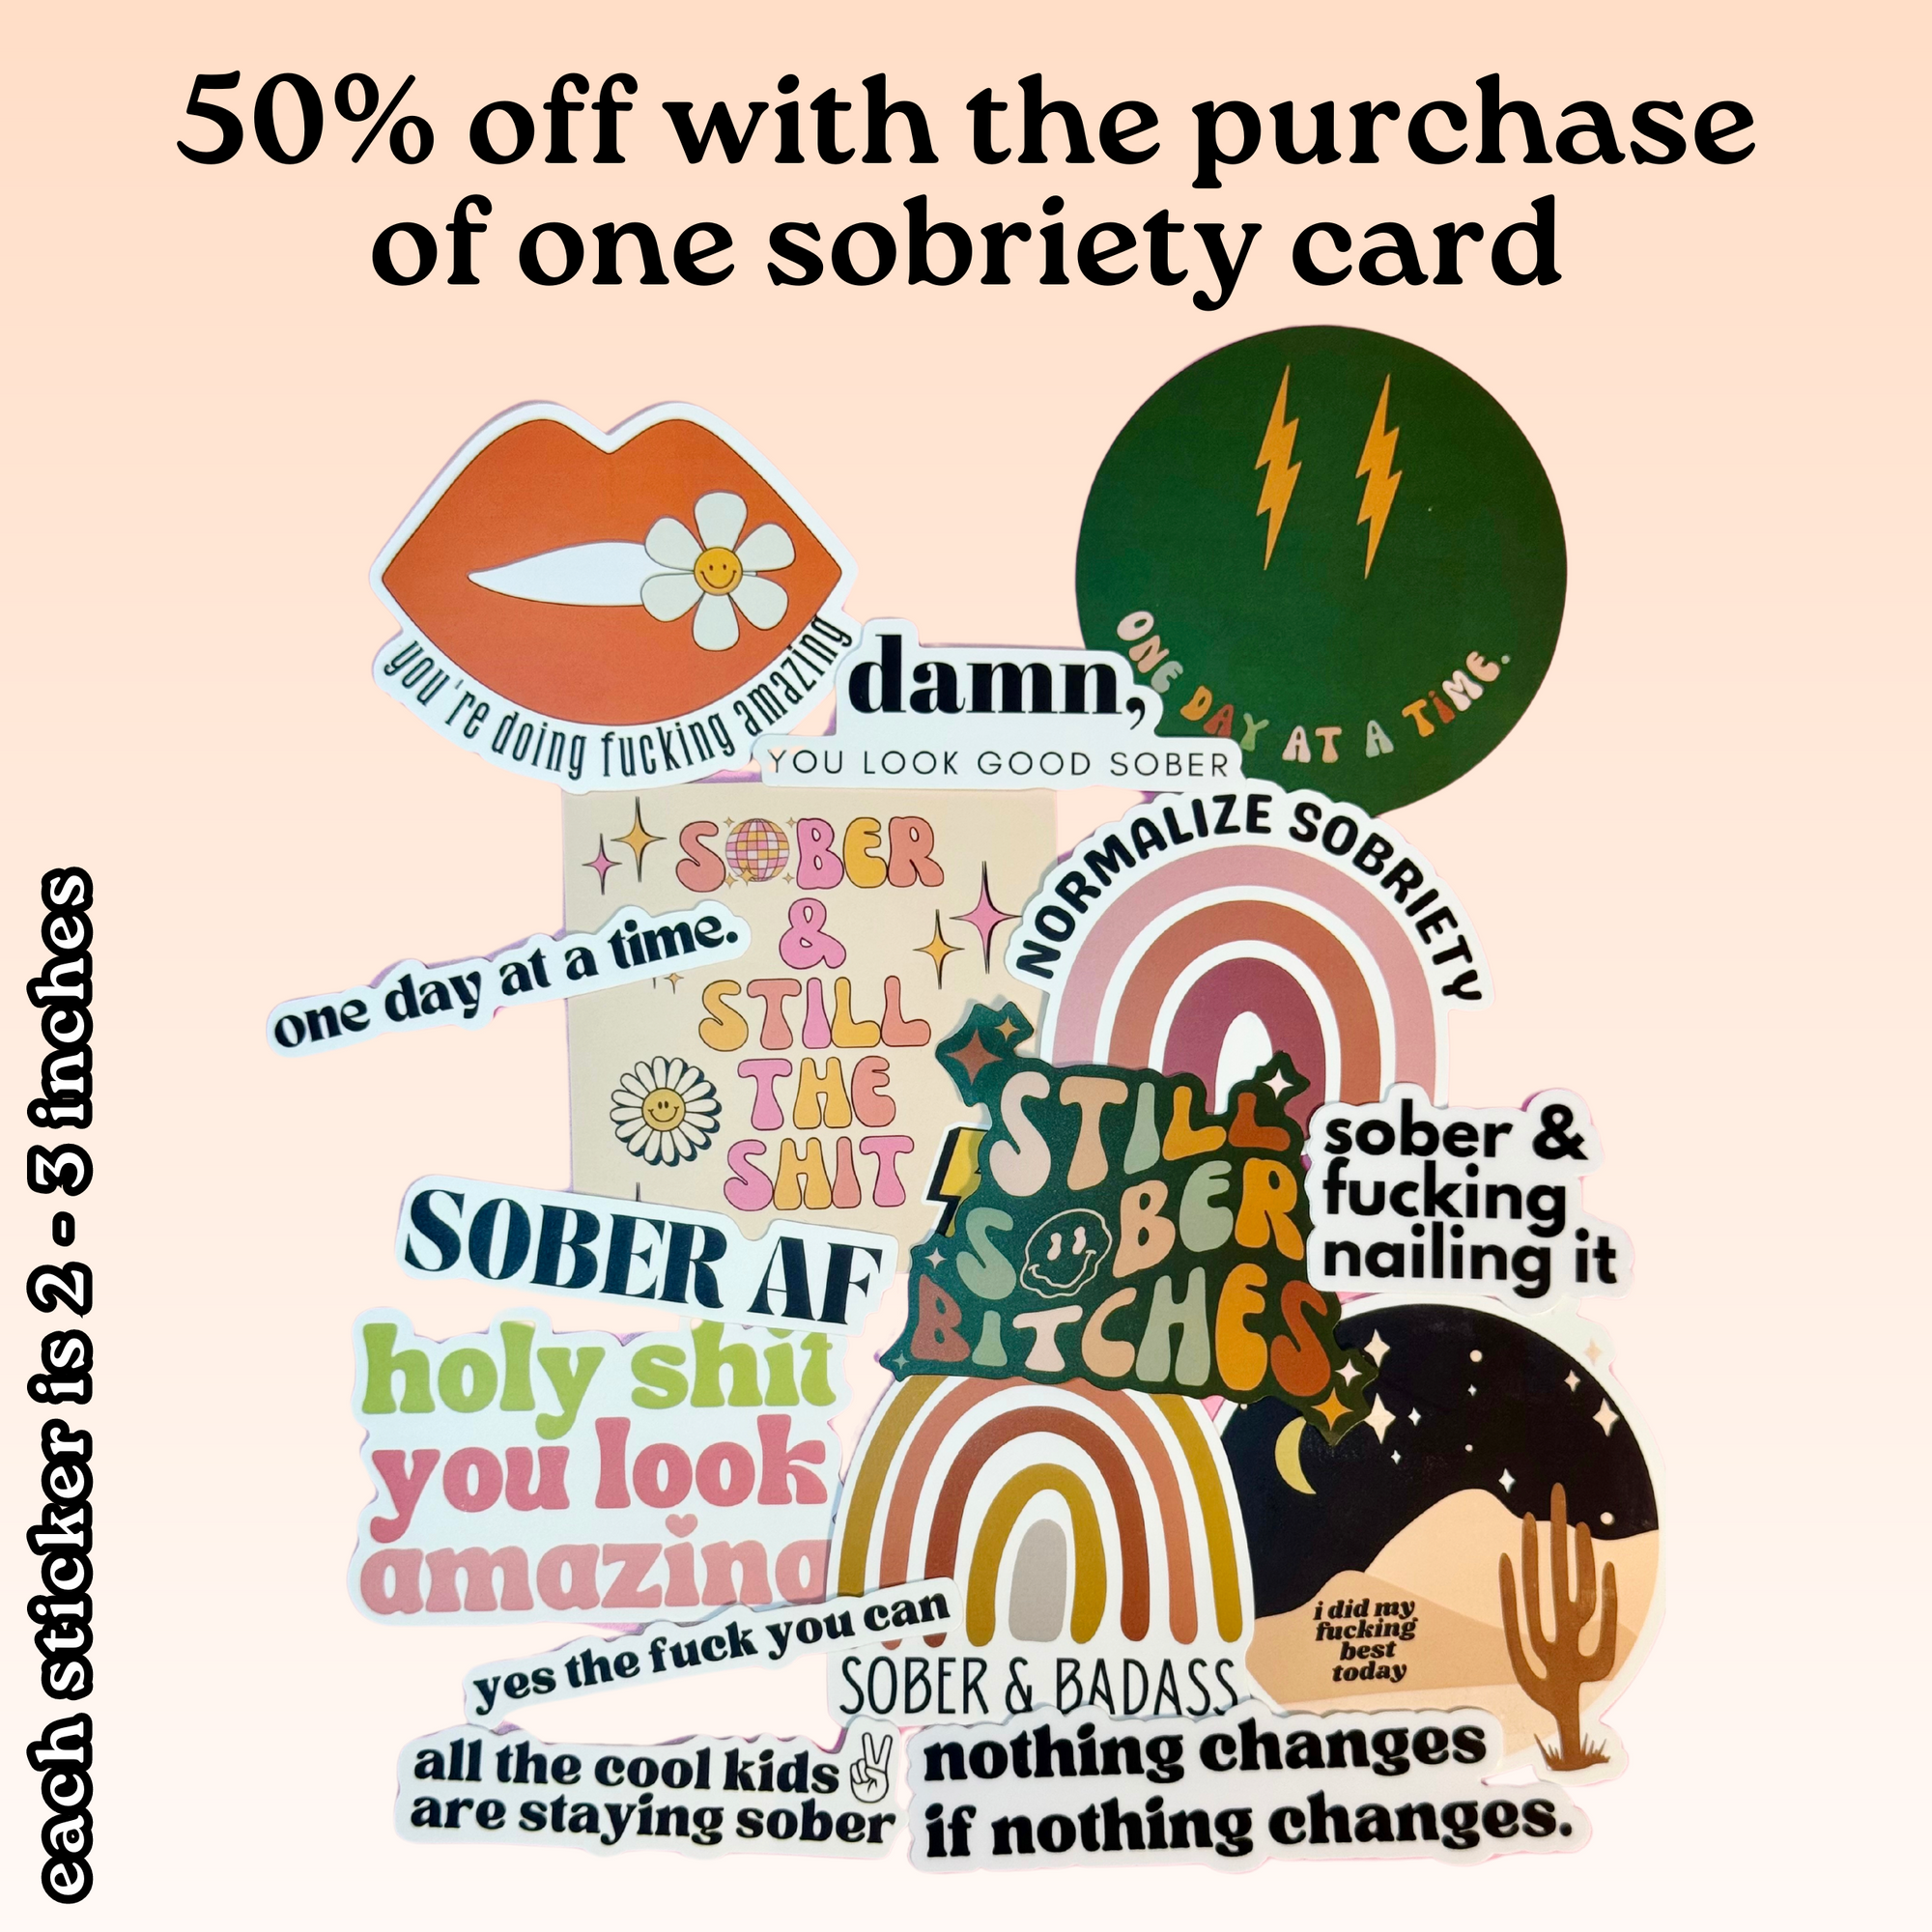 Sobriety You're Fucking Nailing It Card